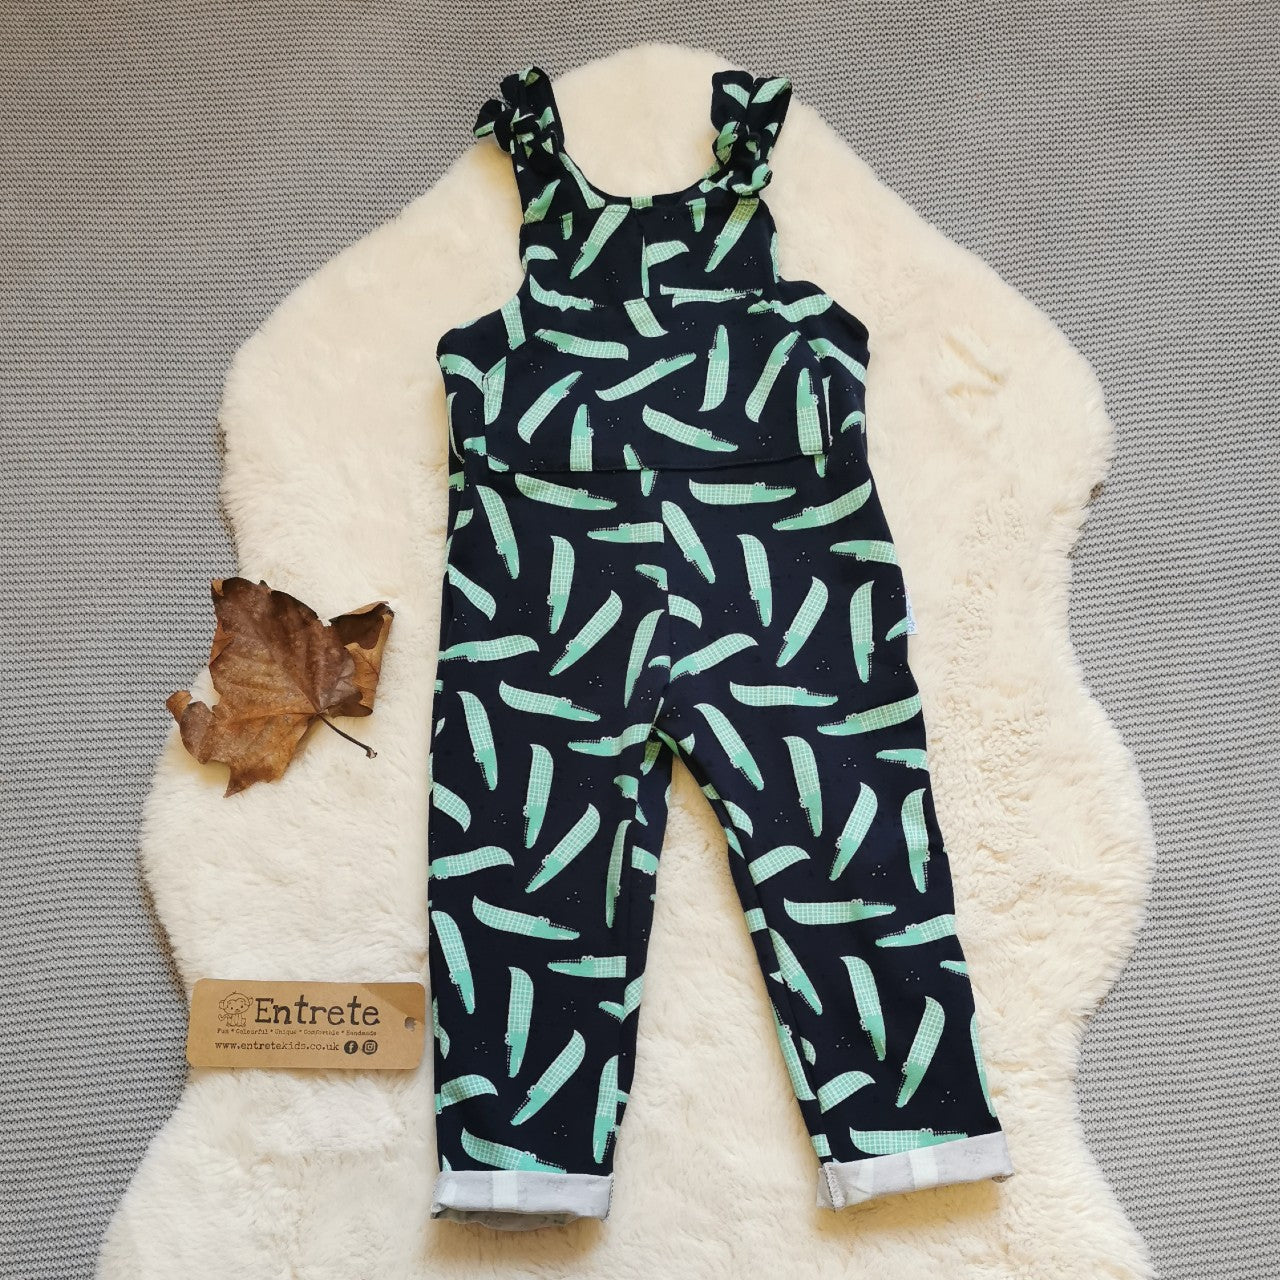 The amazingly fun navy crocodiles tie strap dungarees, handmade using navy crocodiles cotton jersey. Featuring a front pocket, rolled ankles and adjustable tie straps.